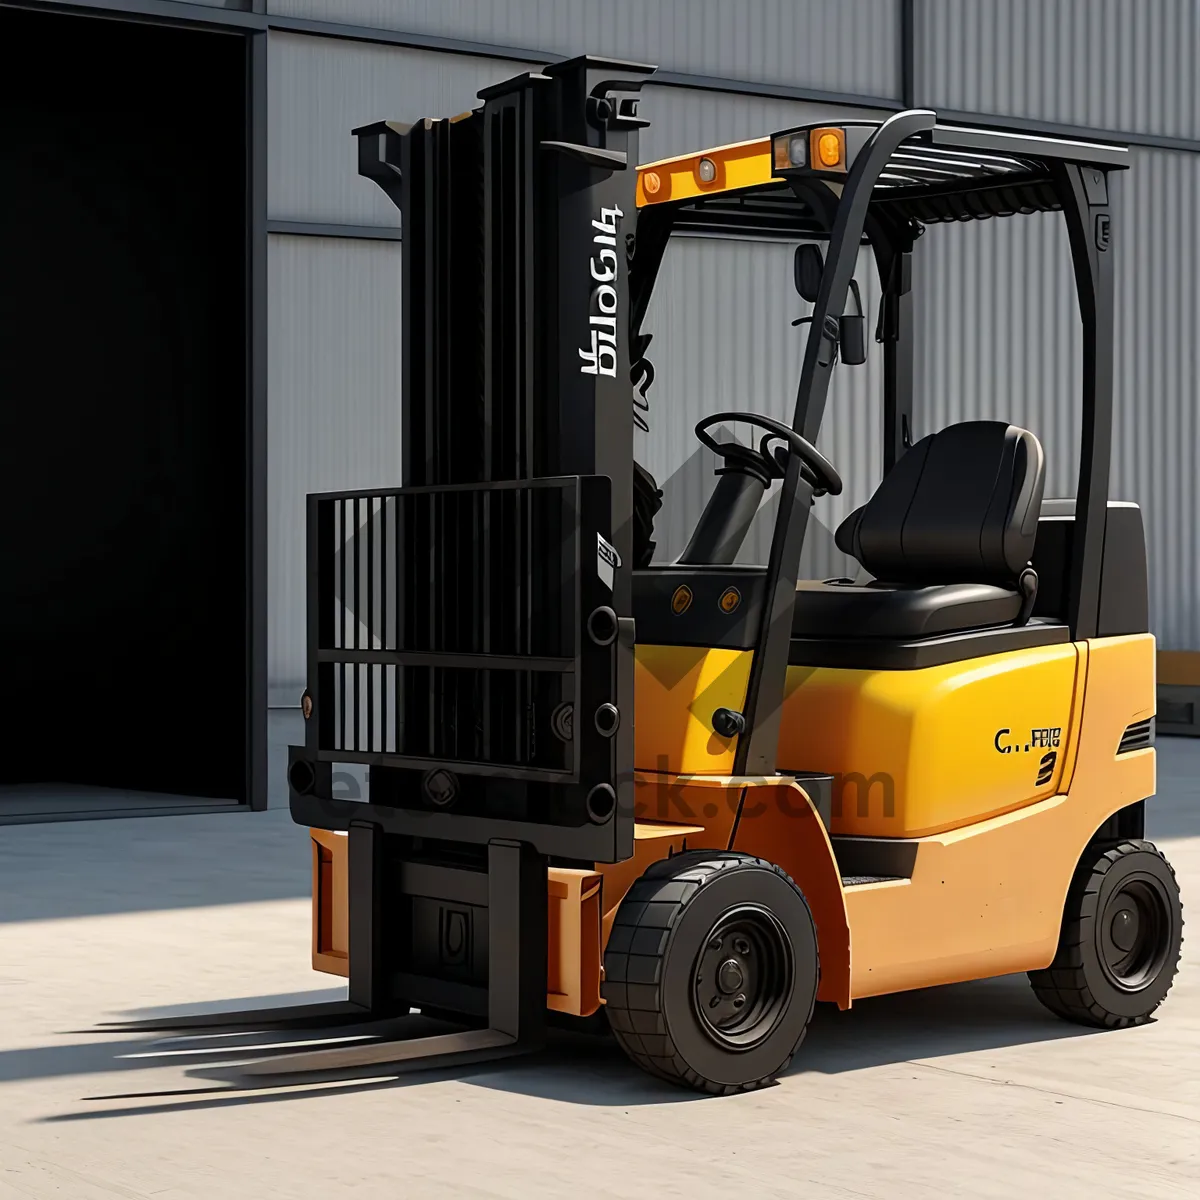 Picture of Heavy Duty Forklift in Warehouse